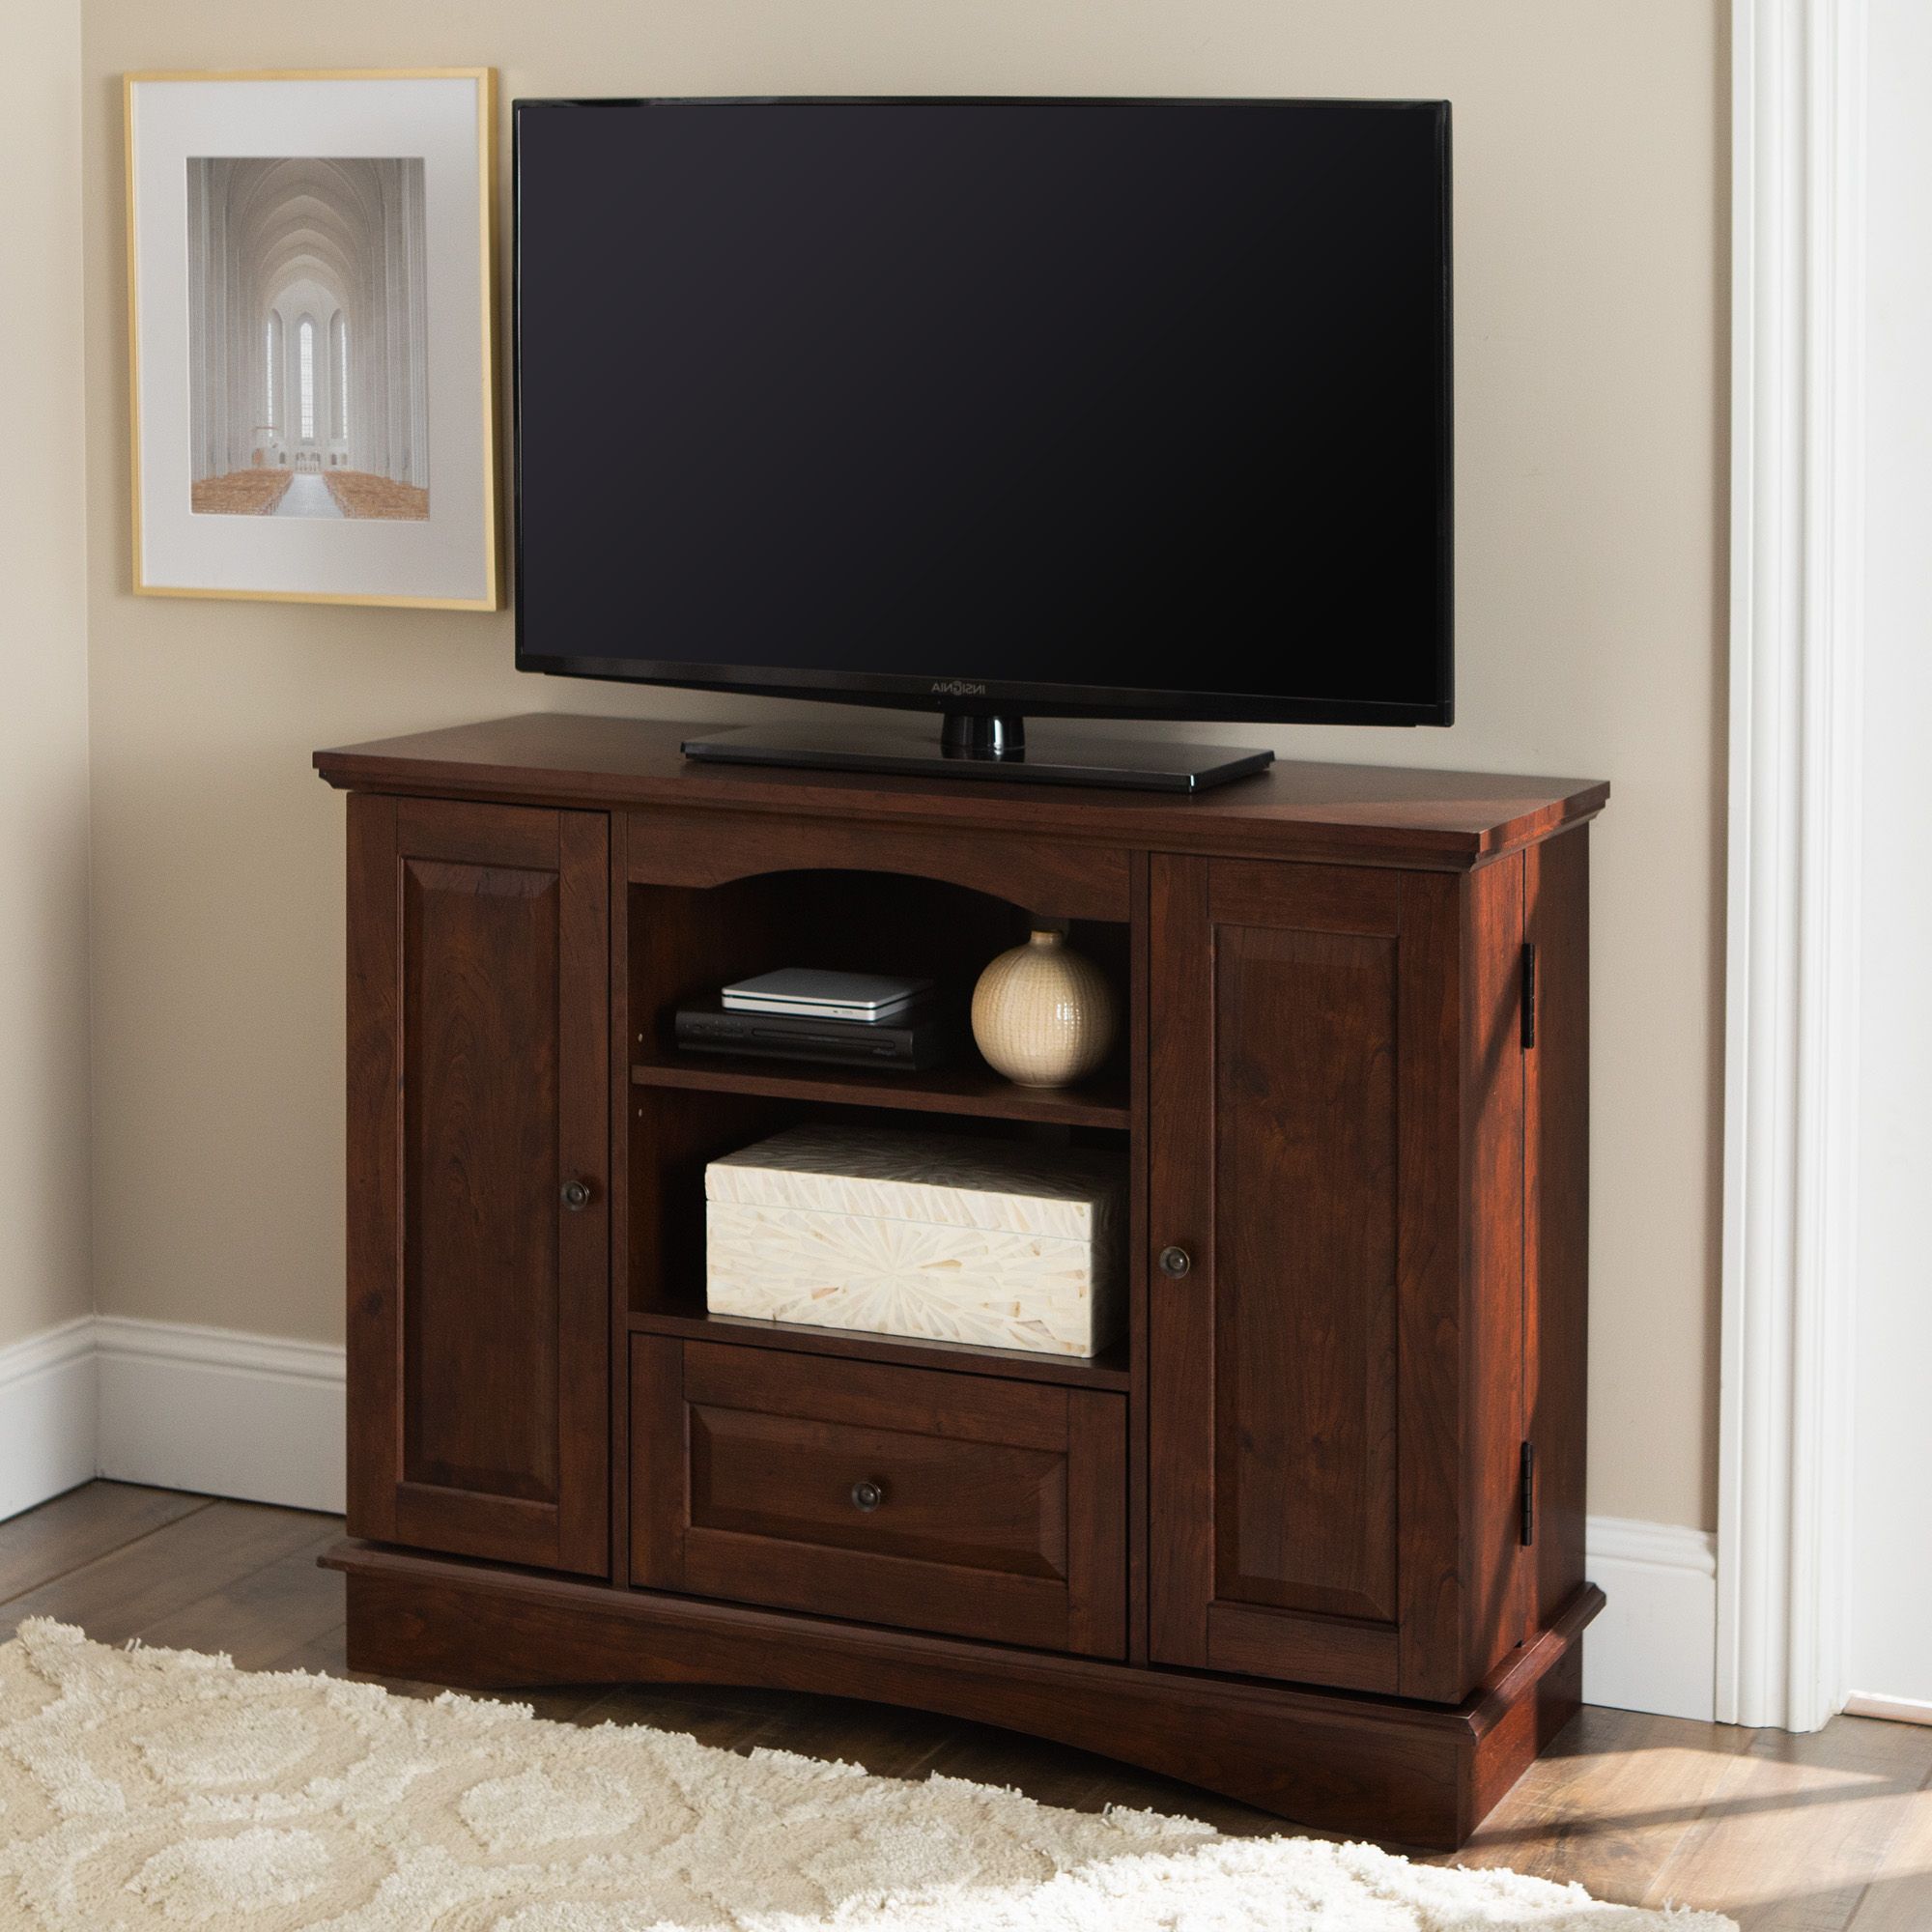 Walker Edison Traditional Tall Tv Stand For Tvs Up To 48 Throughout Popular Lionel Corner Tv Stands For Tvs Up To 48" (View 2 of 10)